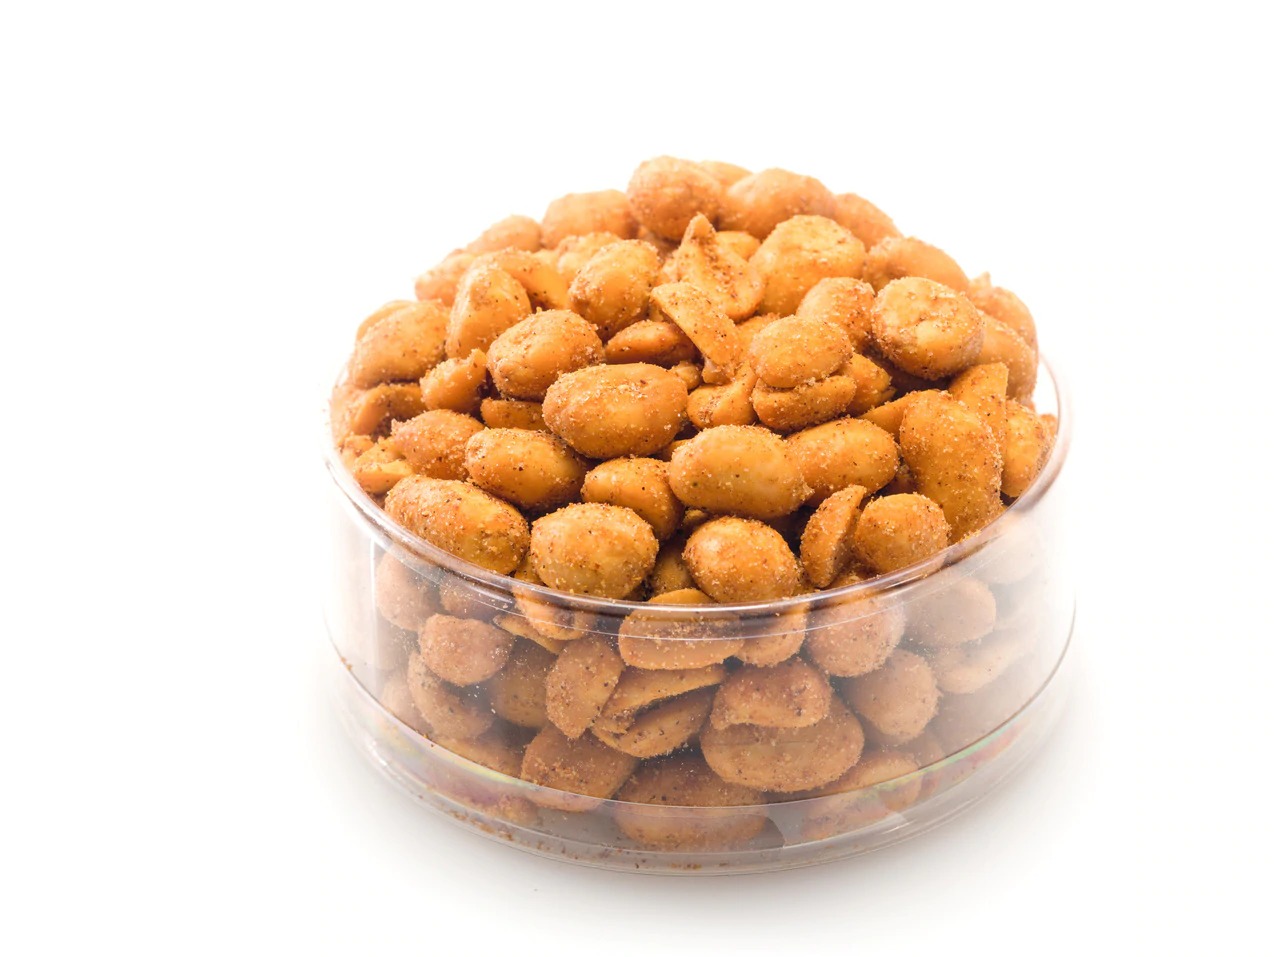 Are Peanuts Good for You